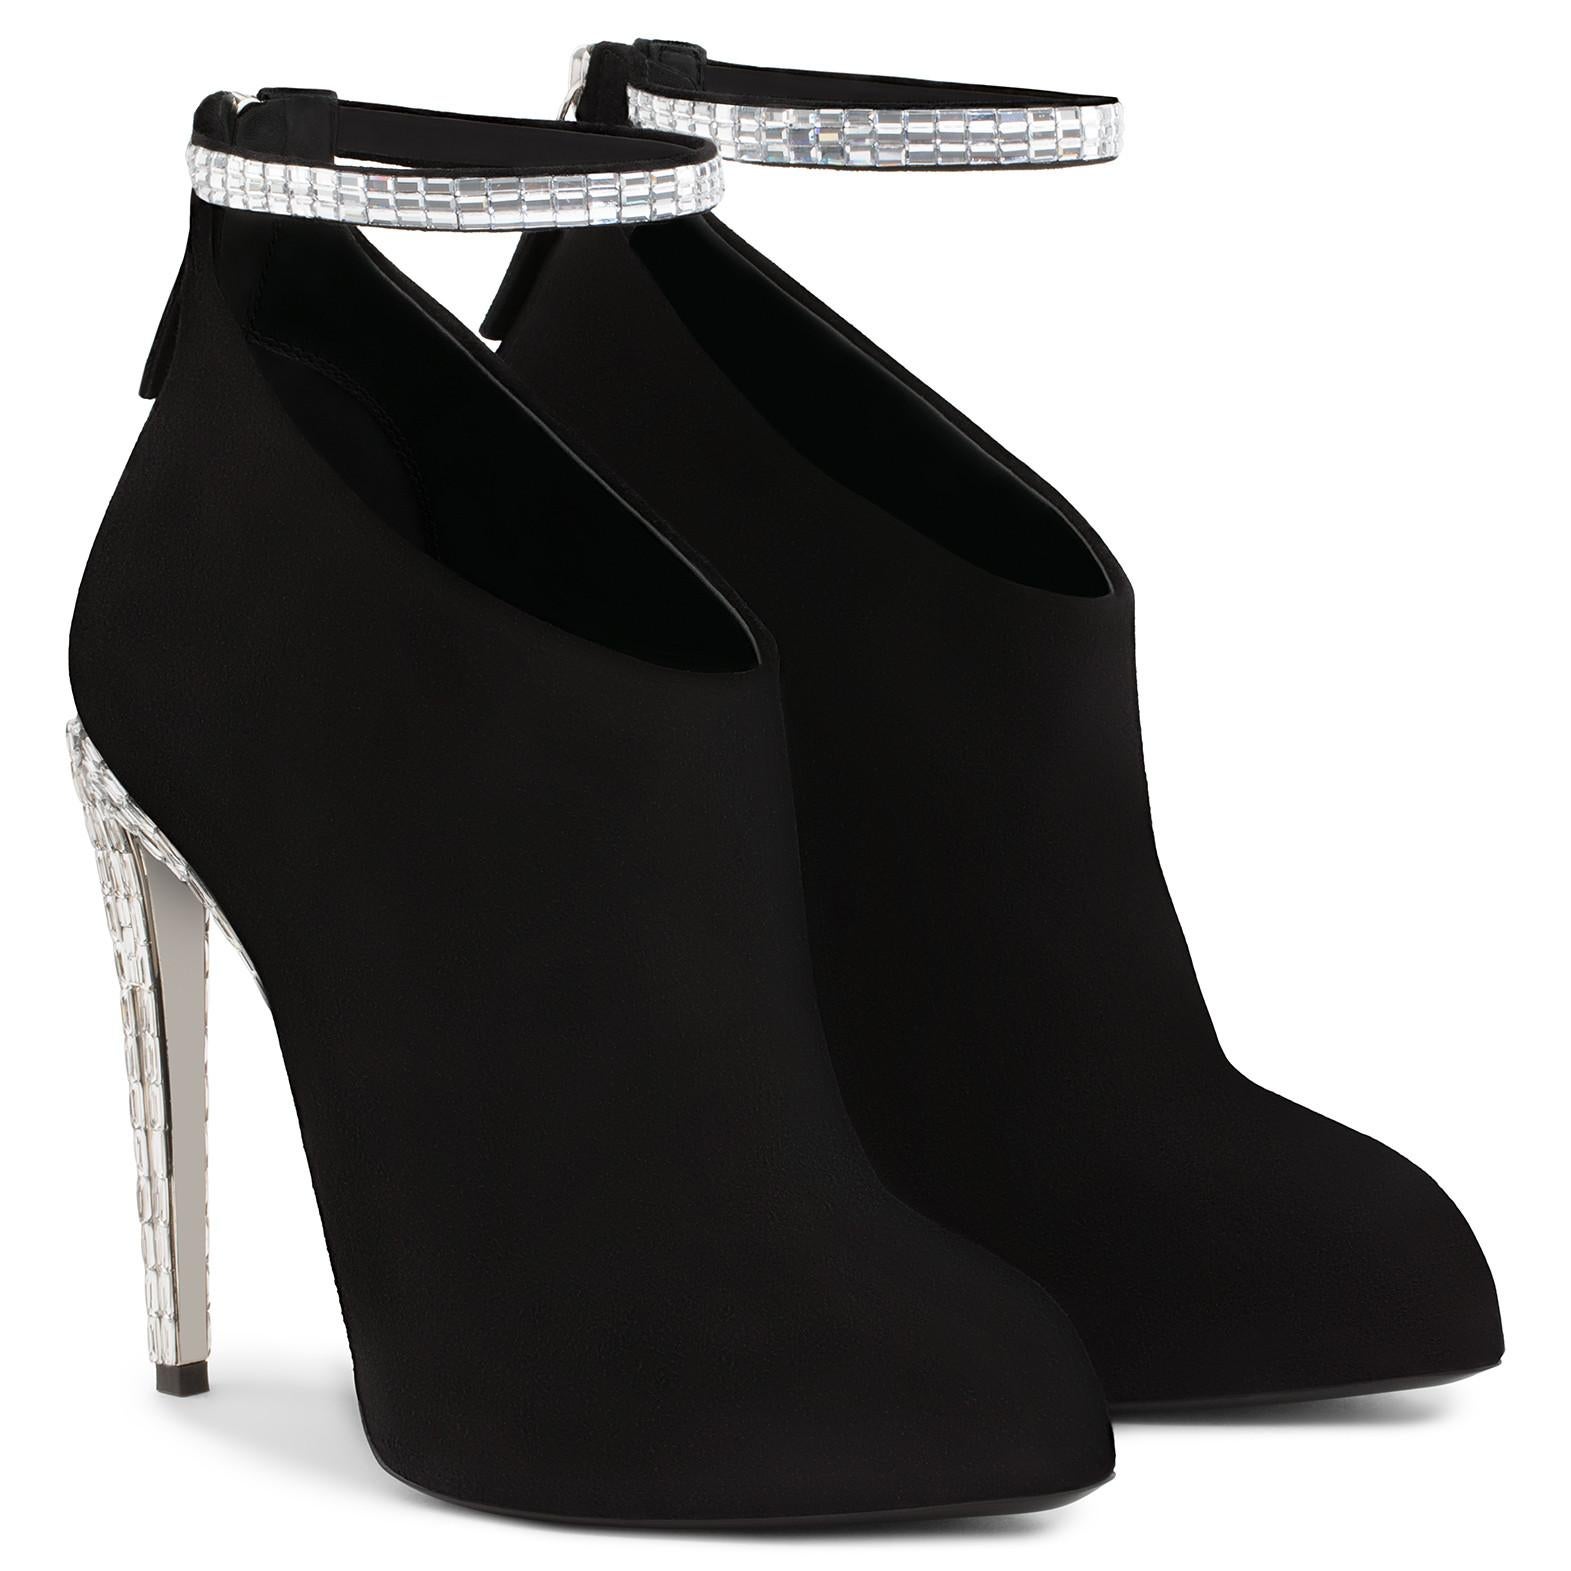 Giuseppe Zanotti NEW Black Suede Crystal Strass Ankle Evening Boots Booties 

Original purchase price $1,995
Size IT 36
Suede
Crystal 
Ankle zip closure
Made in Italy
Heel height 5